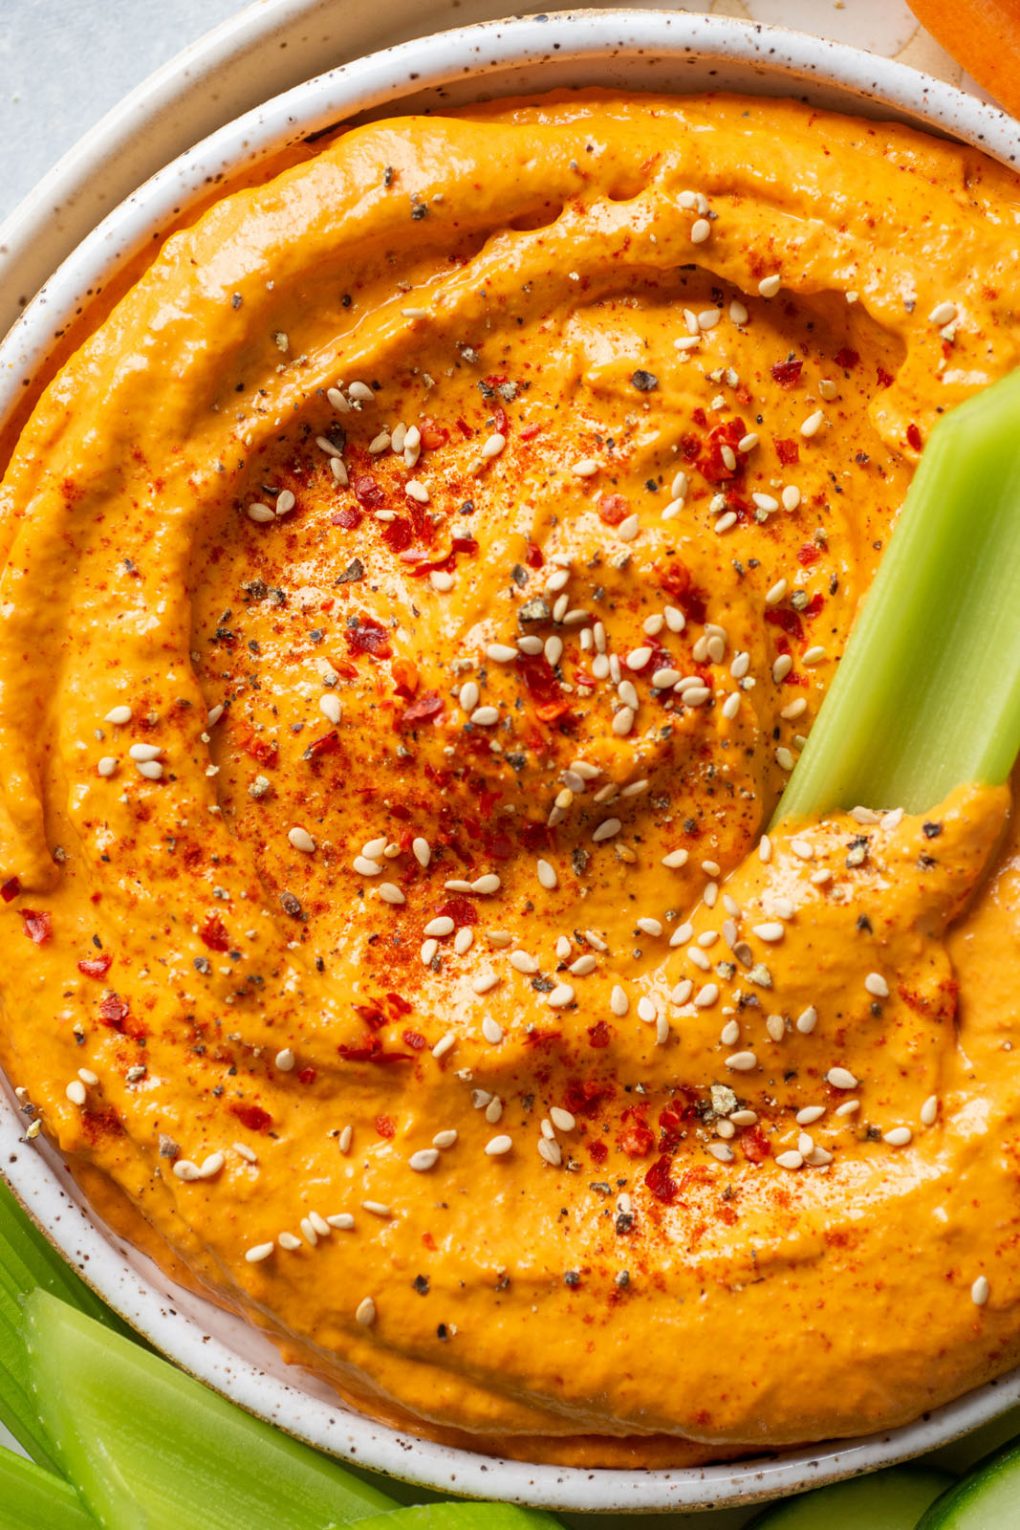 Close up overhead shot of a small speckled white bowl filled with bright orange roasted red pepper dip. Dip is garnished with sesame seeds and chili flakes. On a plate with carrots, sliced cucumber, and celery sticks.